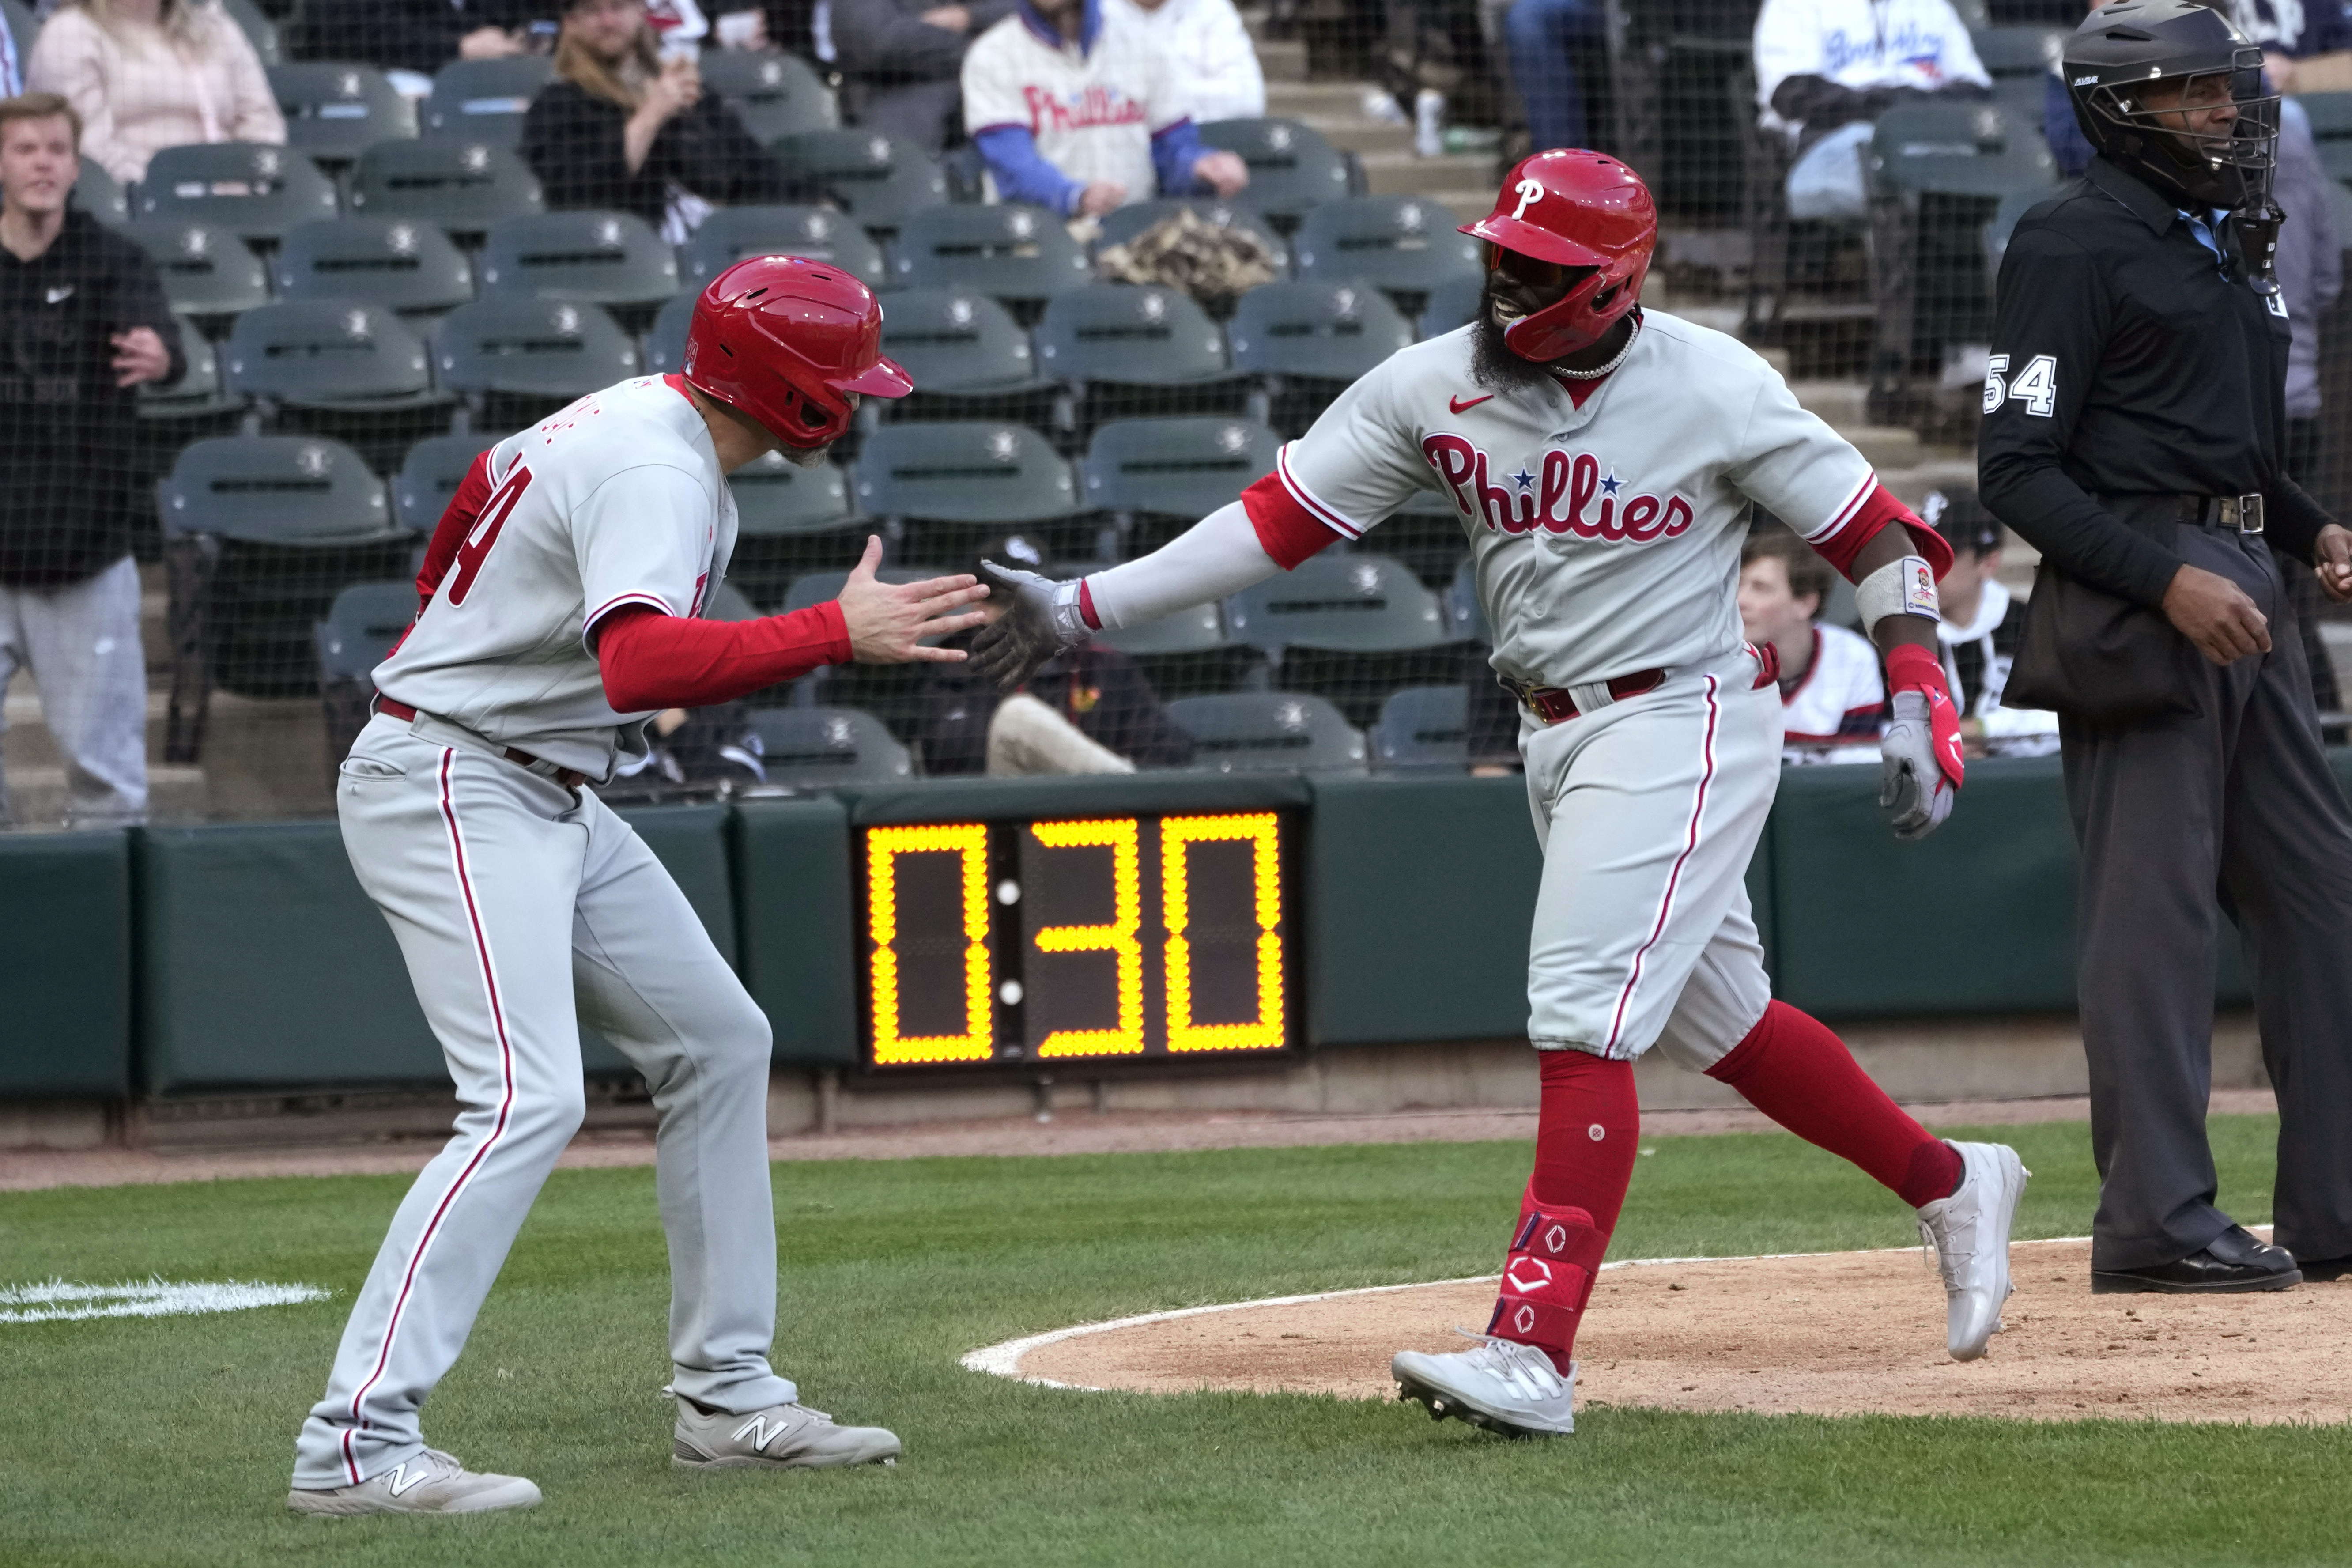 Josh Harrison, you are a Phillie! Phillies 7, White Sox 4 - The